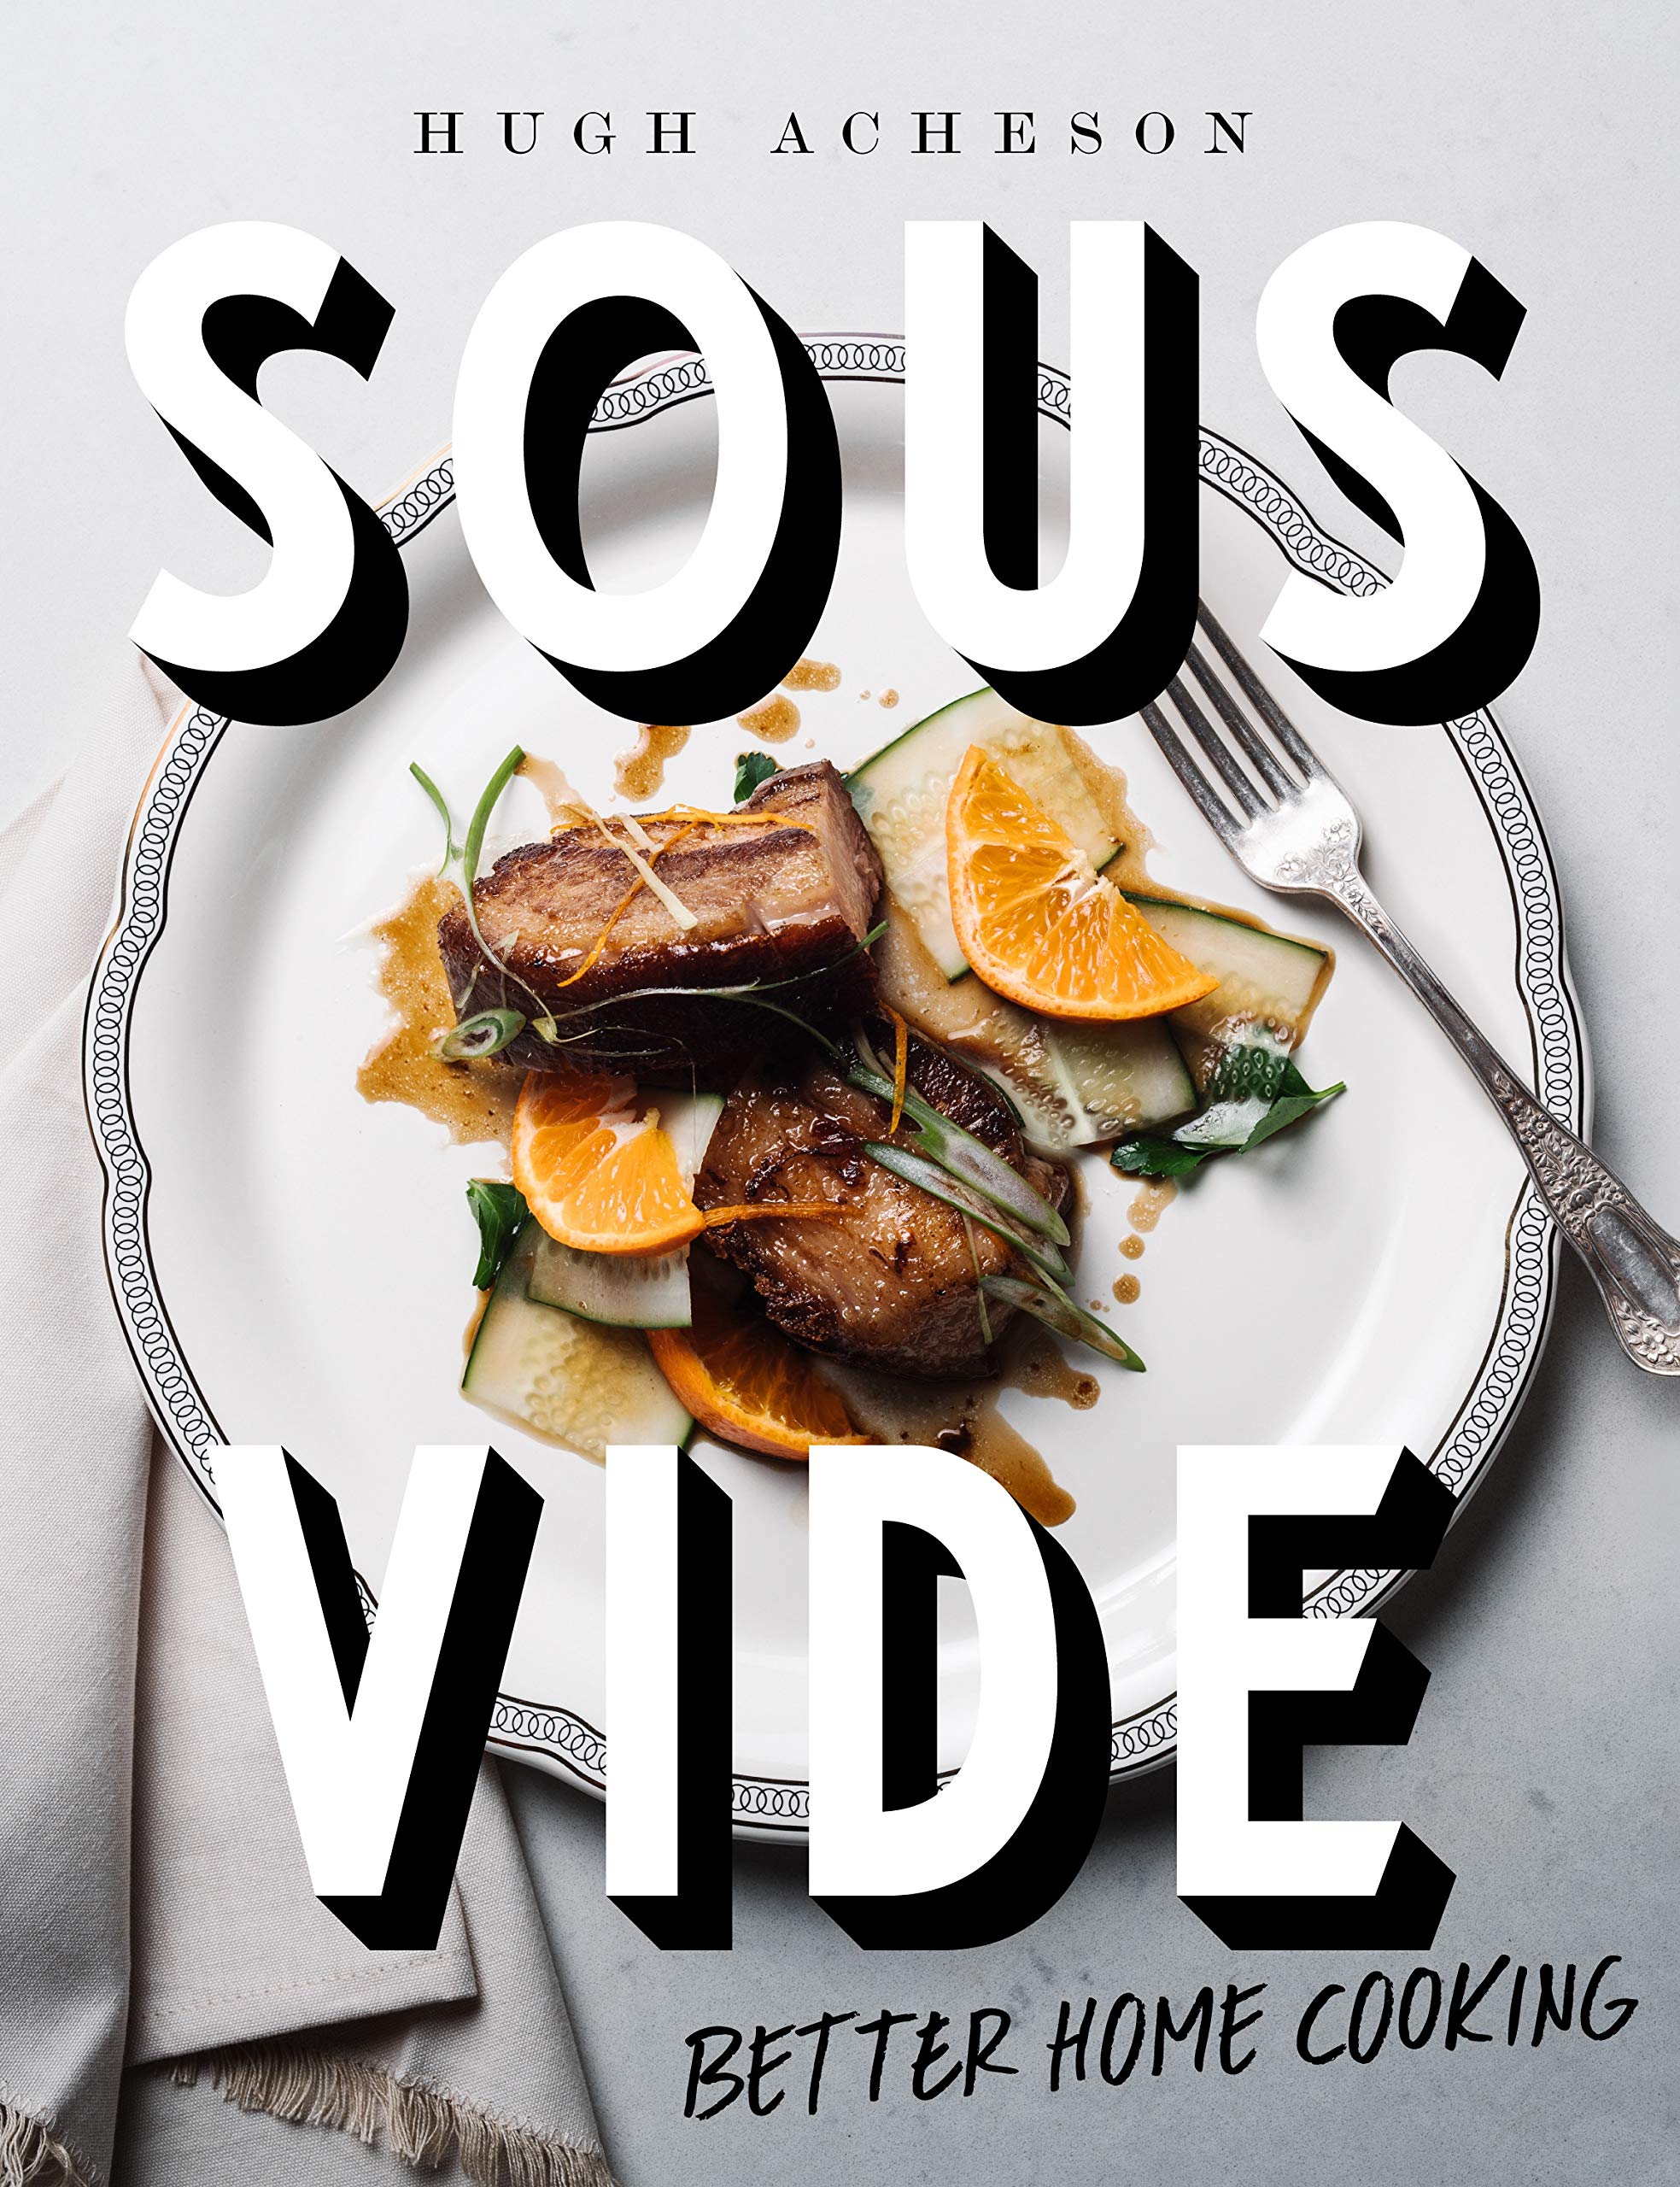 Sous Vide: Better Home Cooking: A Cookbook (Hugh Acheson) *Signed*